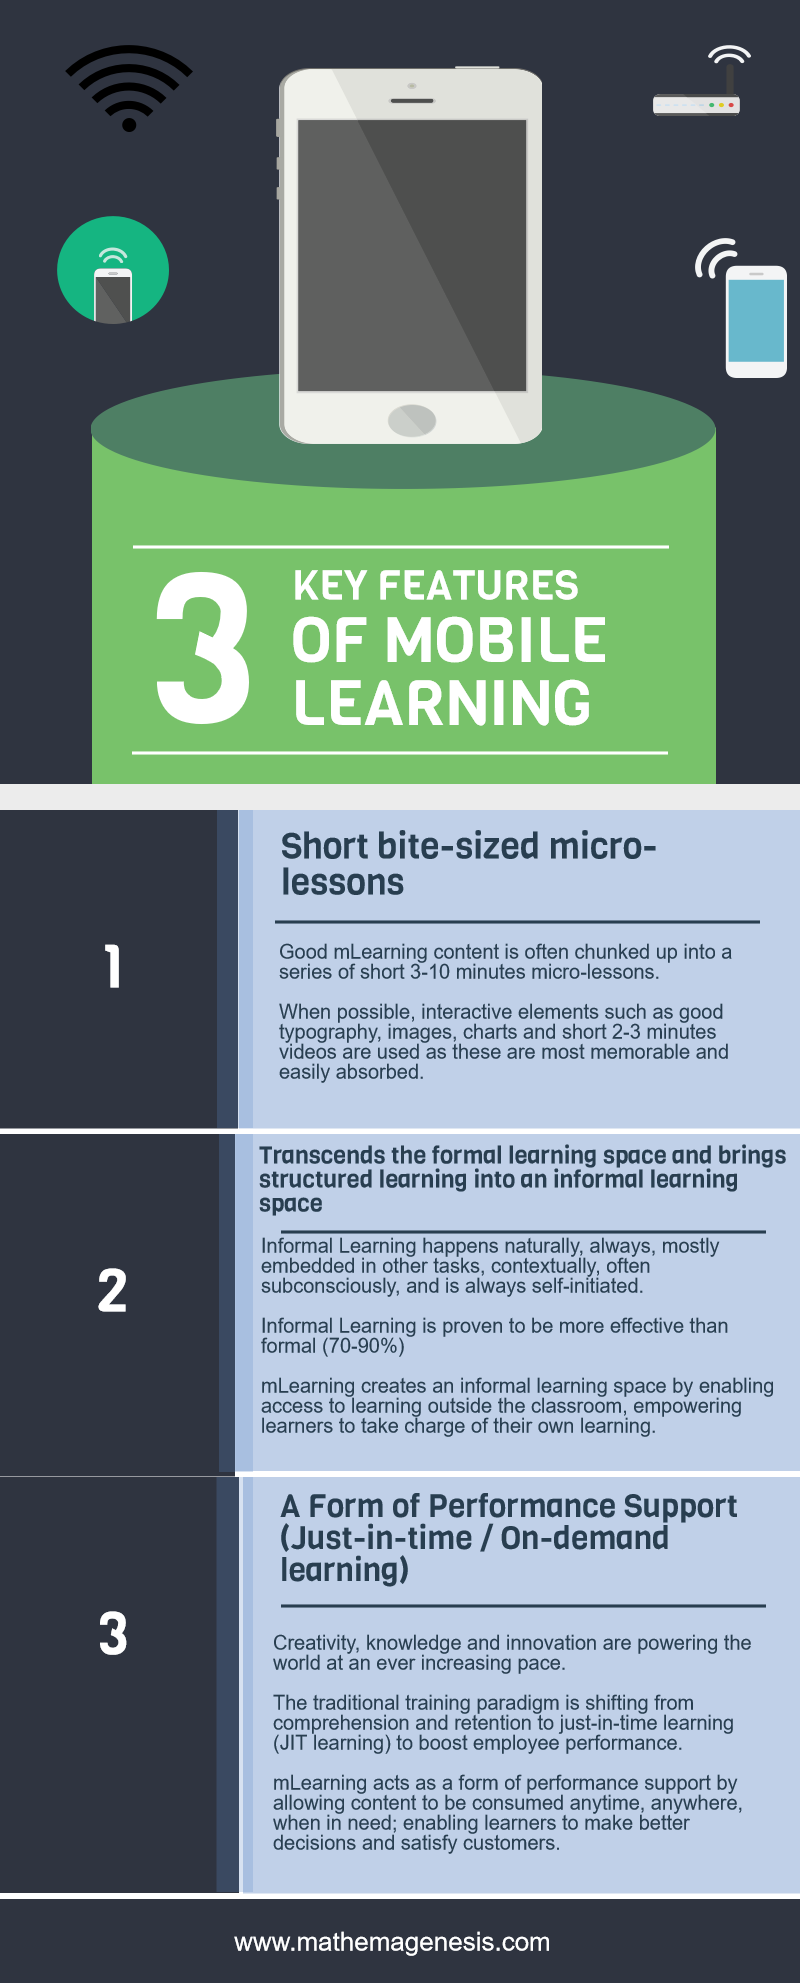 3-key-features-of-mobile-learning-mathemagenesis-com